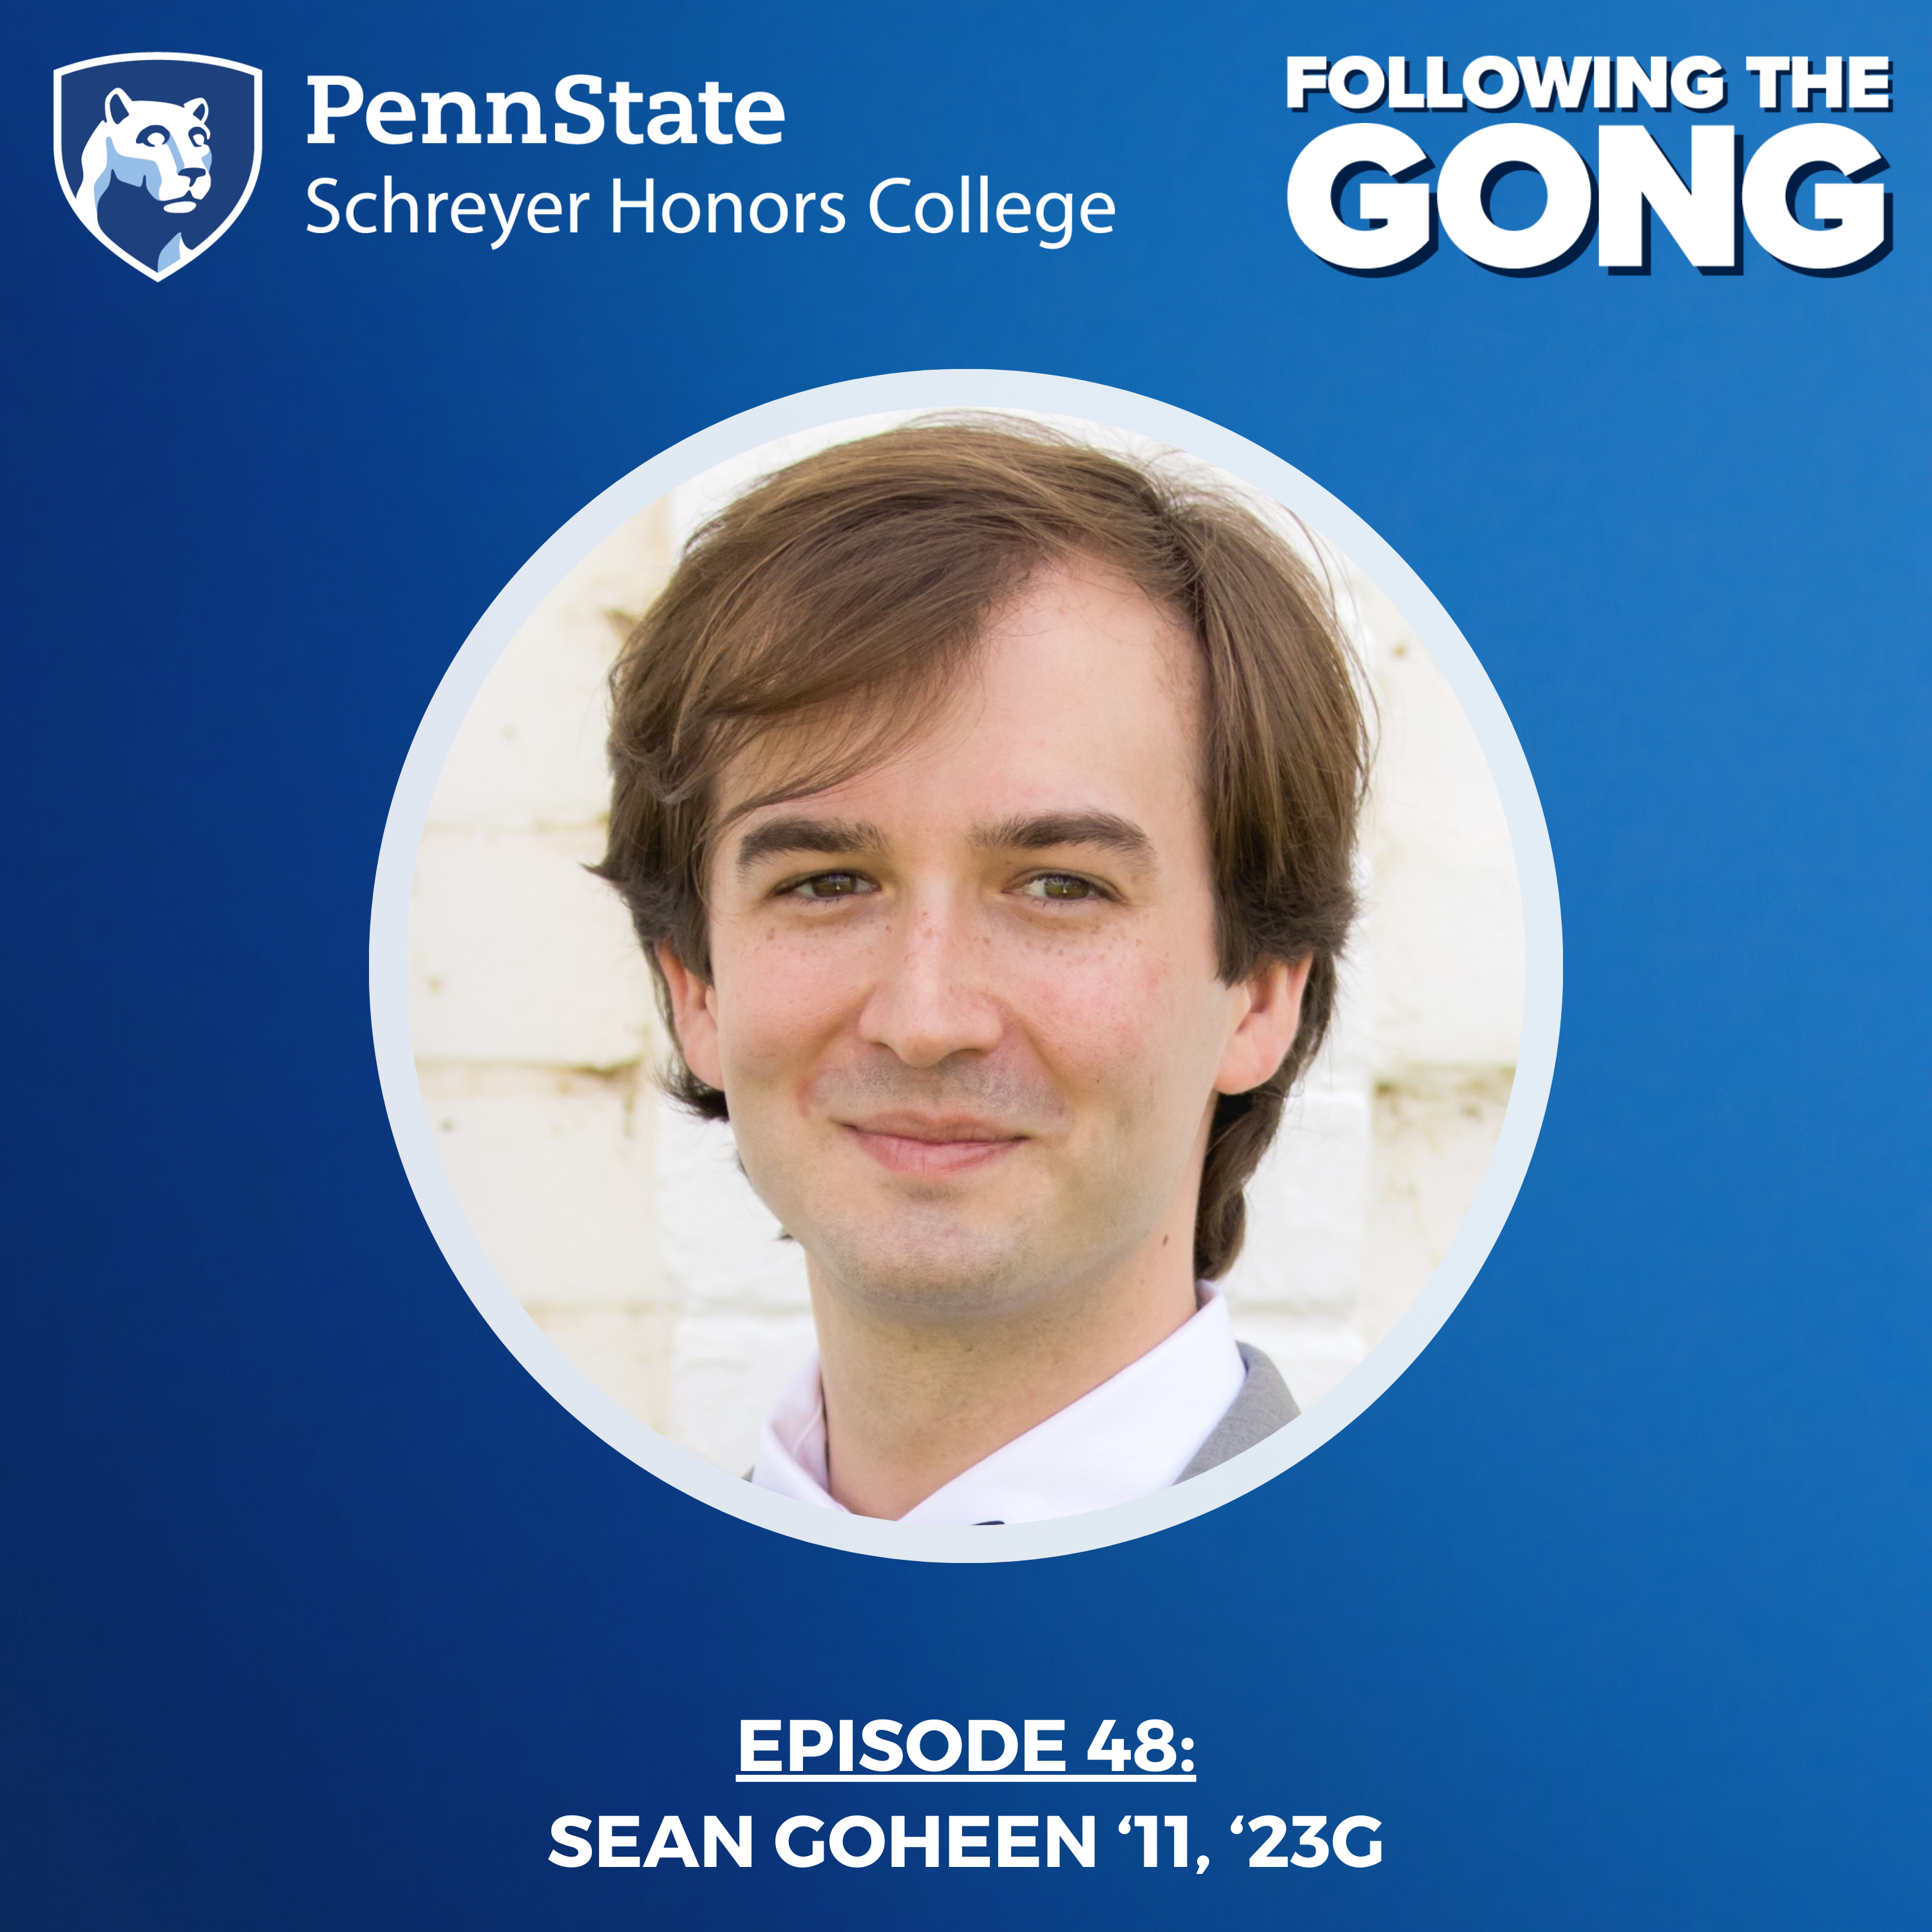 FTG 0048 – Behind the Gong with Alumni Relations Professional and Podcast Host Sean Goheen ’11; with Guest Host Jaz Azari '06